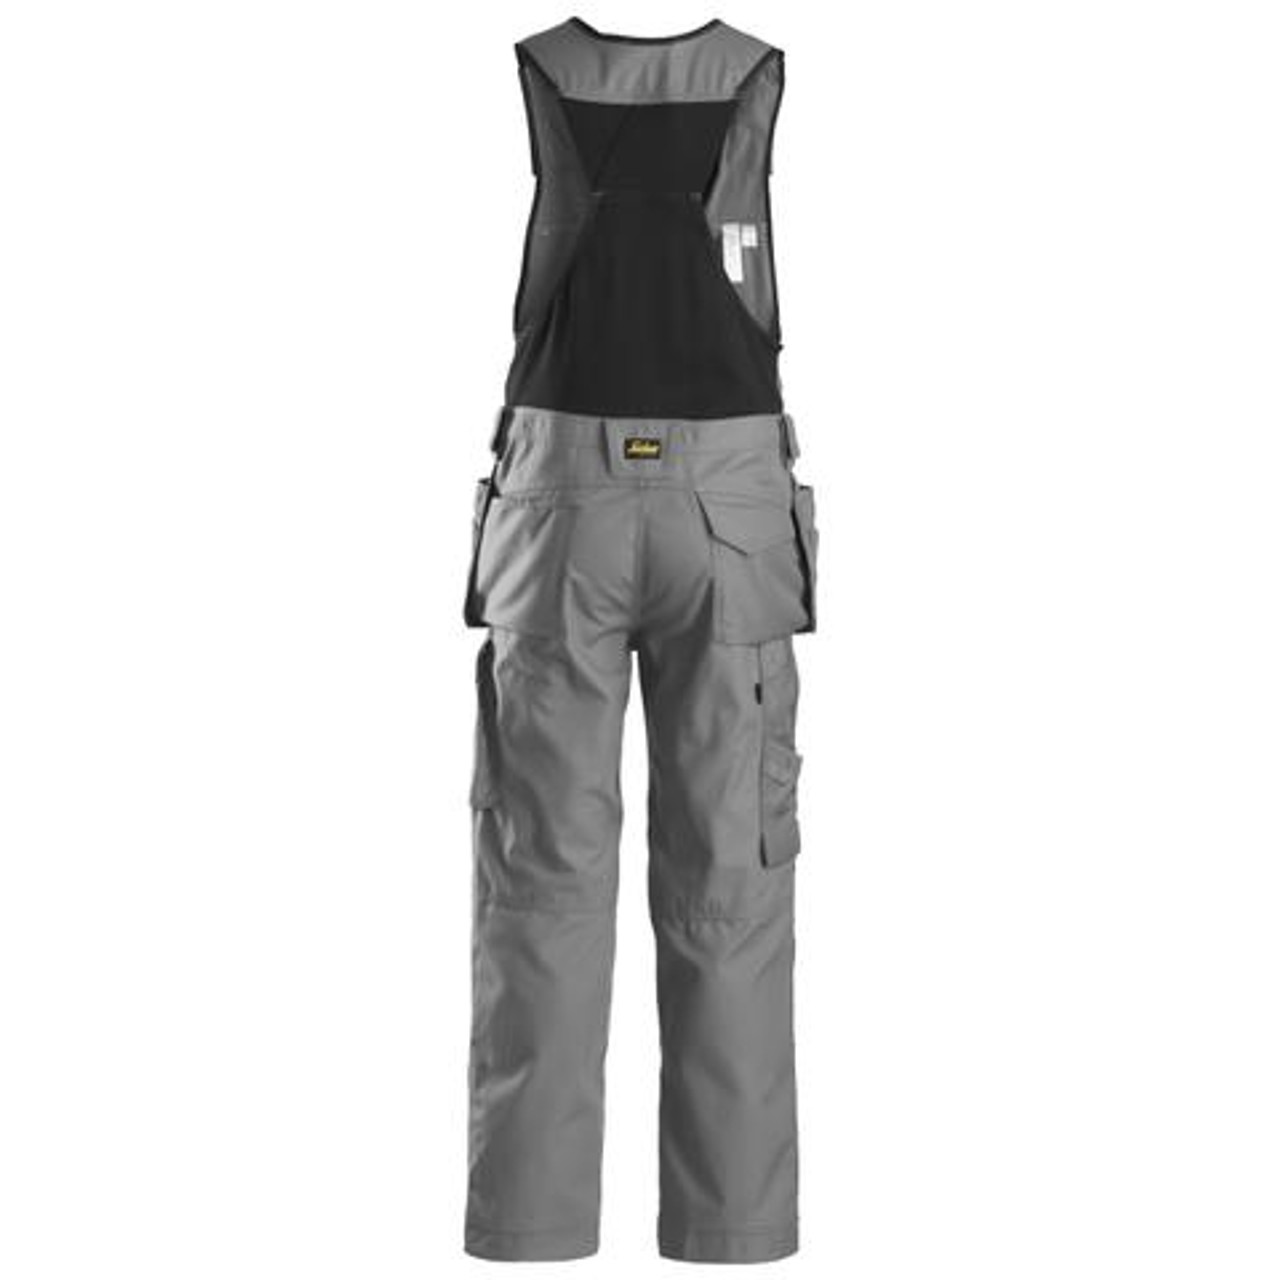 SNICKERS Overalls | 0214 Grey Overalls with Holster Pockets and Kneepad Pockets in Canvas